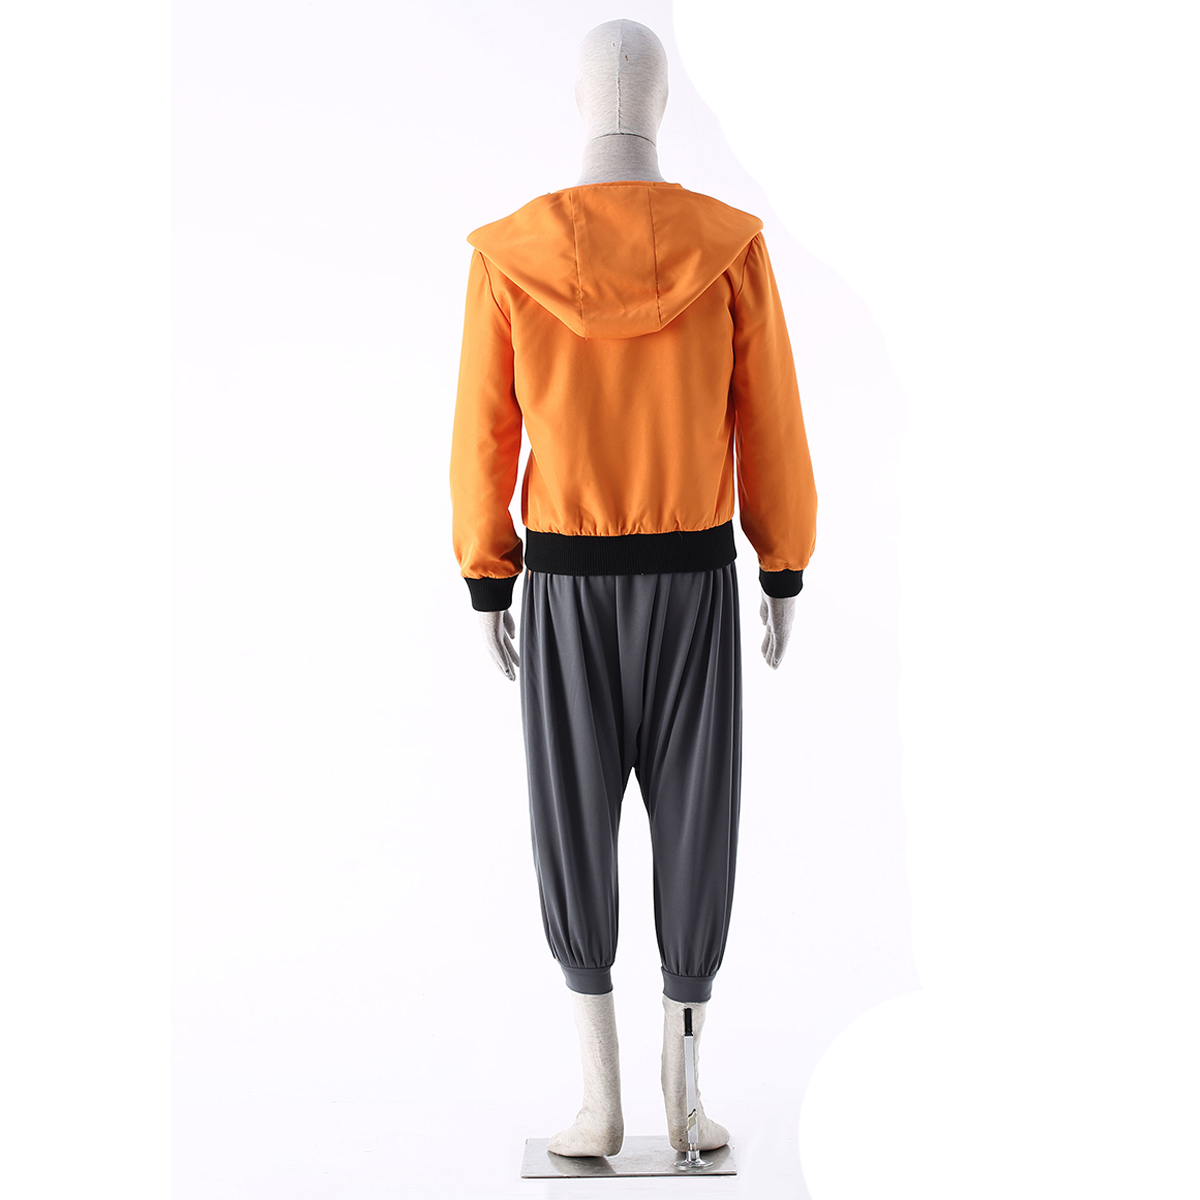 Naruto The Last Naruto 9 Anime Cosplay Costumes Outfit